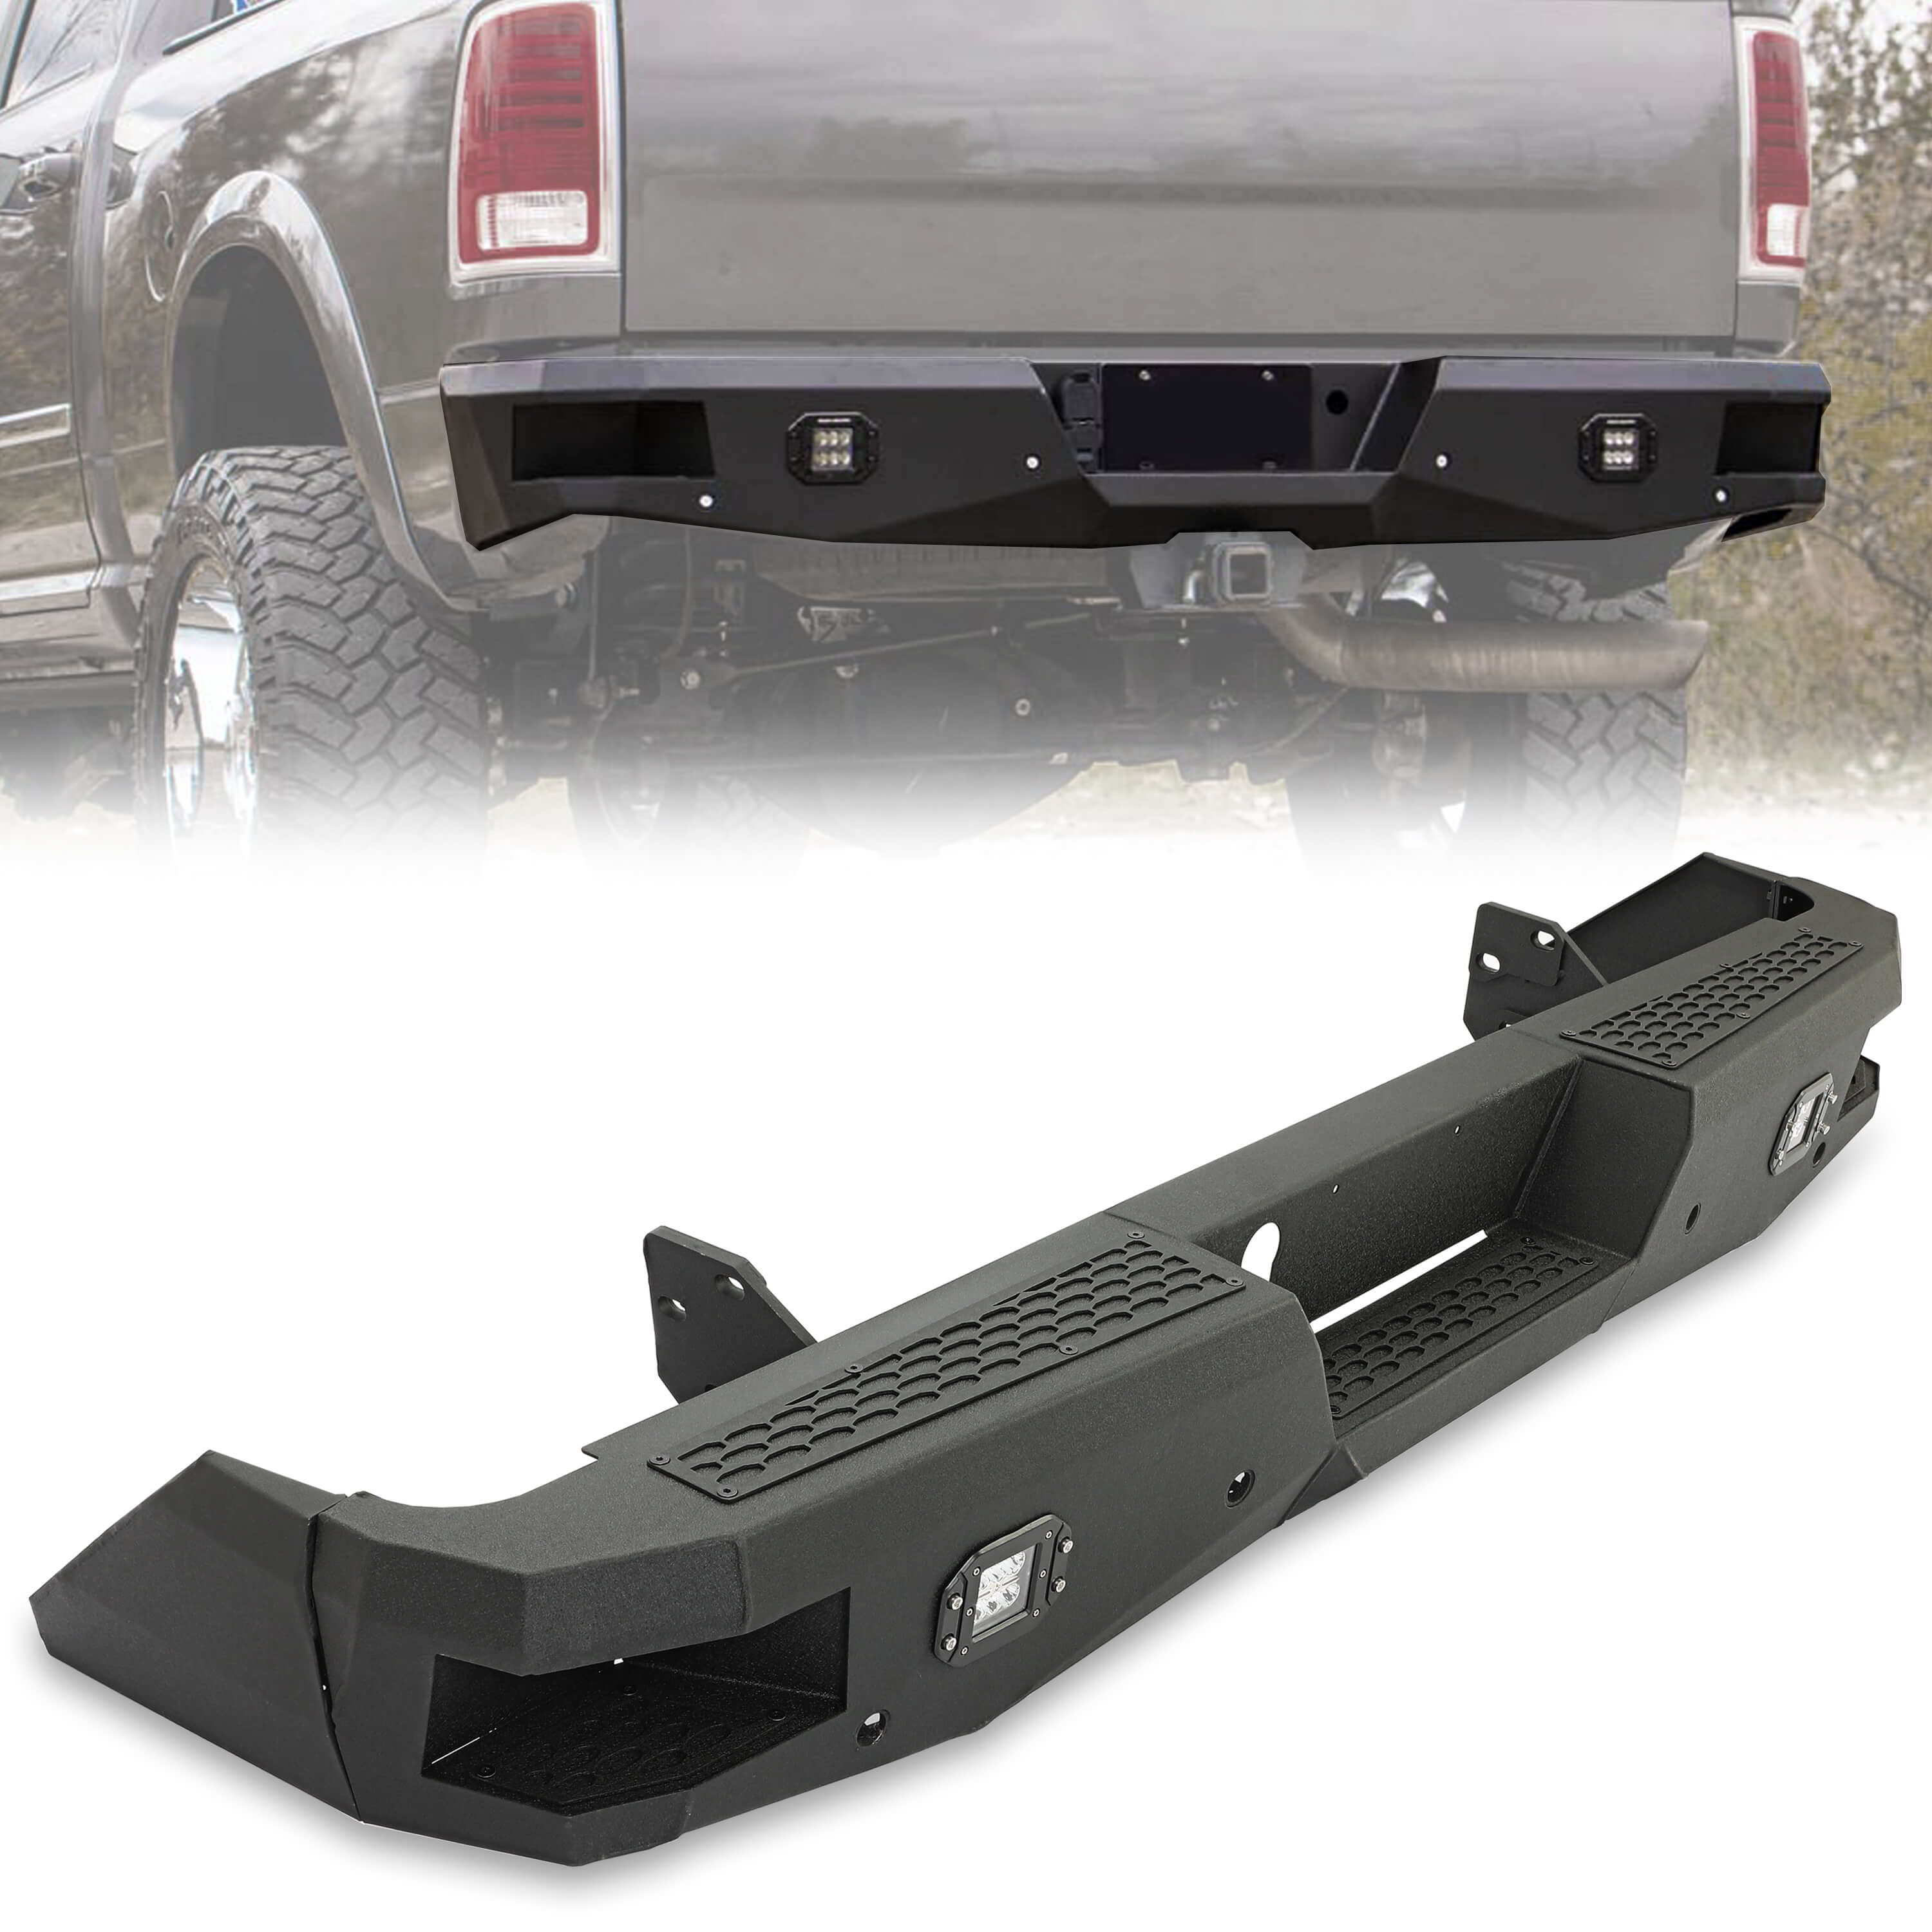 MR.GOP-Off-road Rear Bumper Compatible with 2014-2021 Toyota Tundra 2WD/4WD with 2 LED Lights Powder Coated Steel